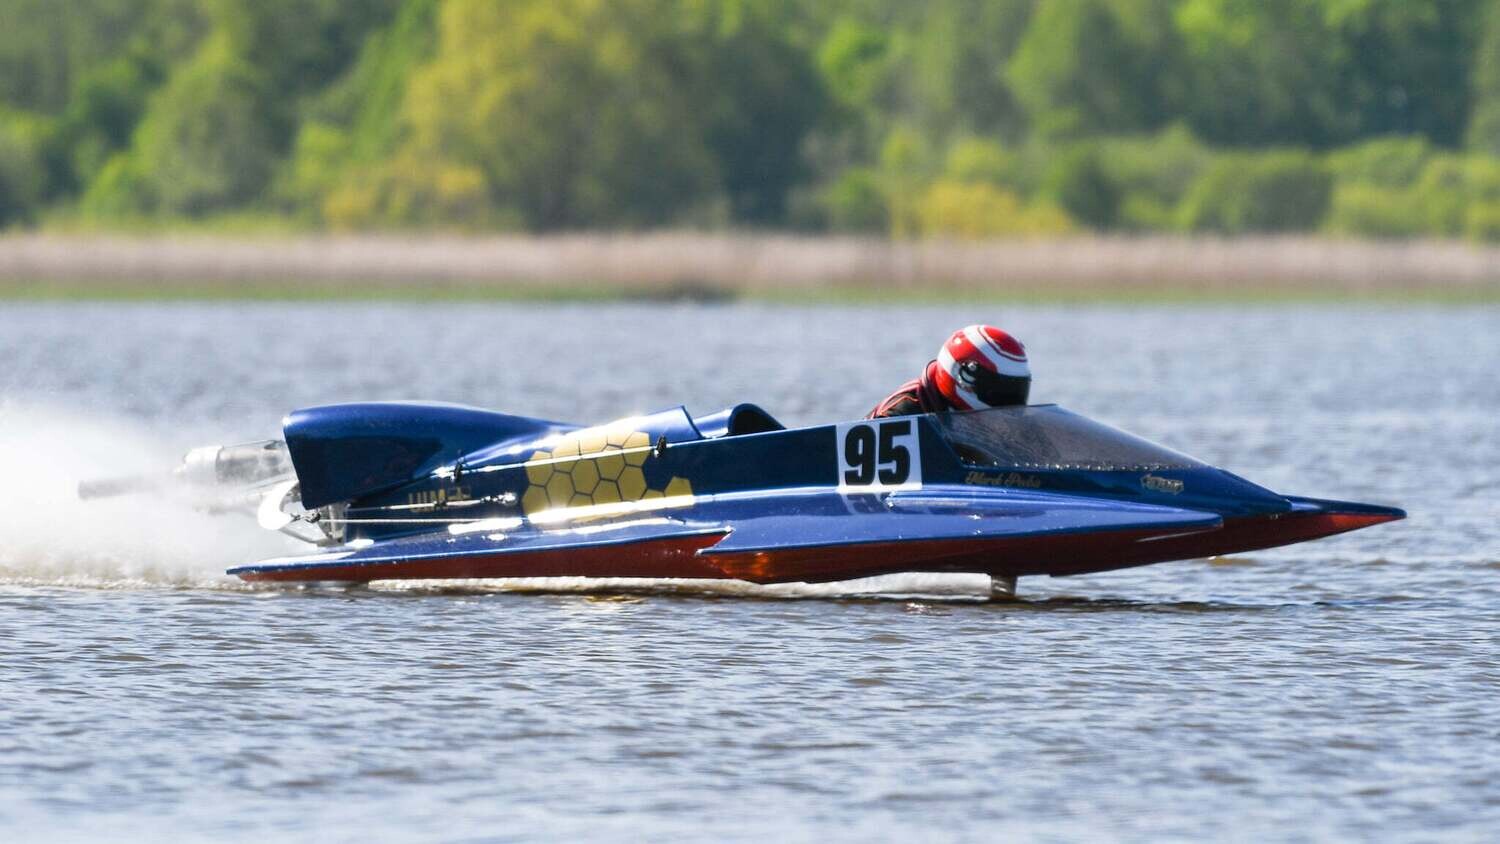 F125 Mosquito racing boat